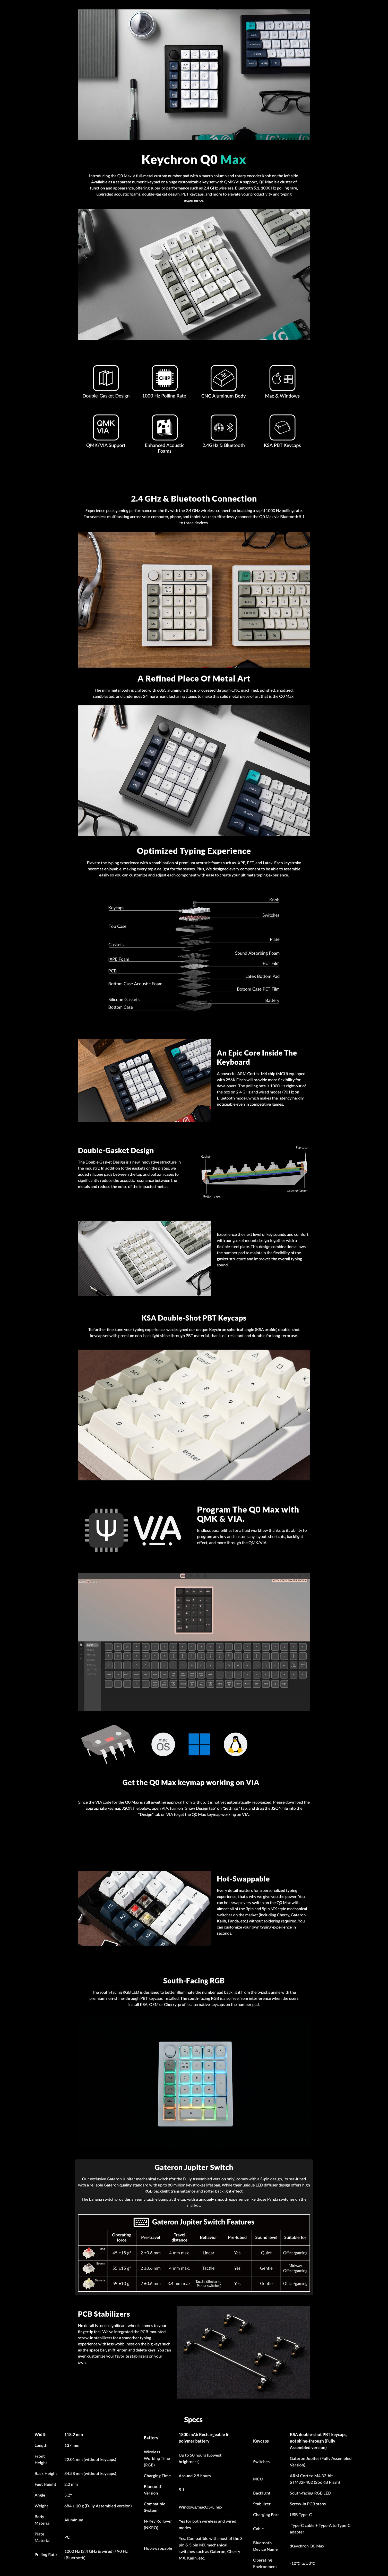 A large marketing image providing additional information about the product Keychron Q0 Max - QMK/VIA Custom Wireless Number Pad - White (Gateron Jupiter Brown Switch) - Additional alt info not provided